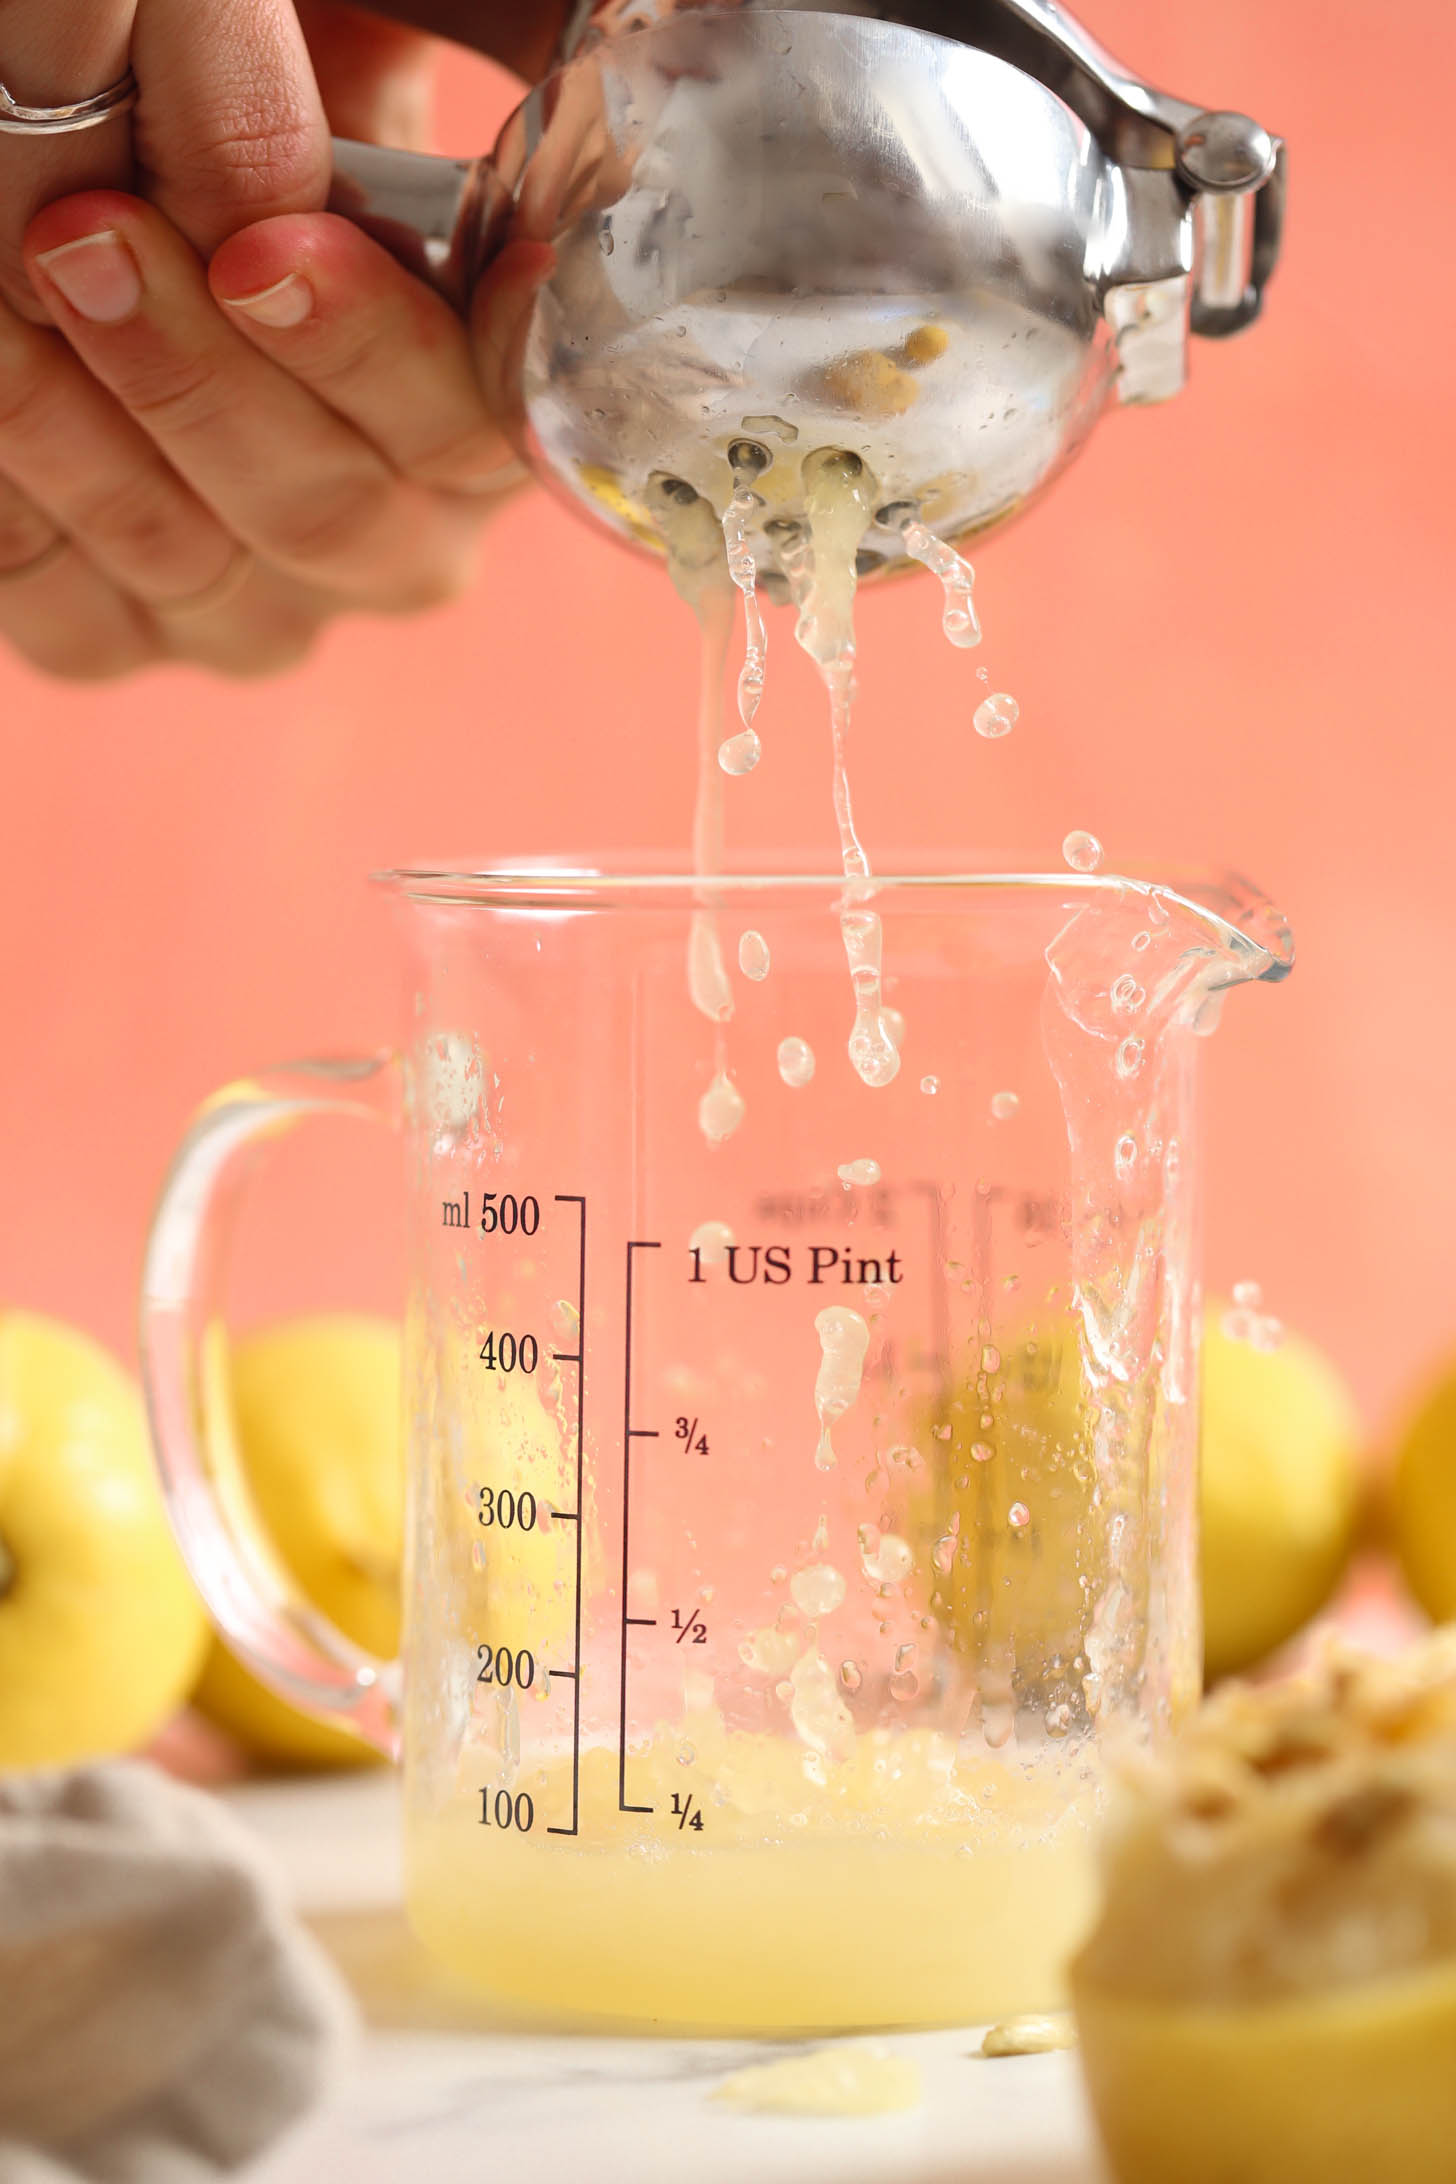 Using a citrus juicer to squeeze a lemon into a measuring glass